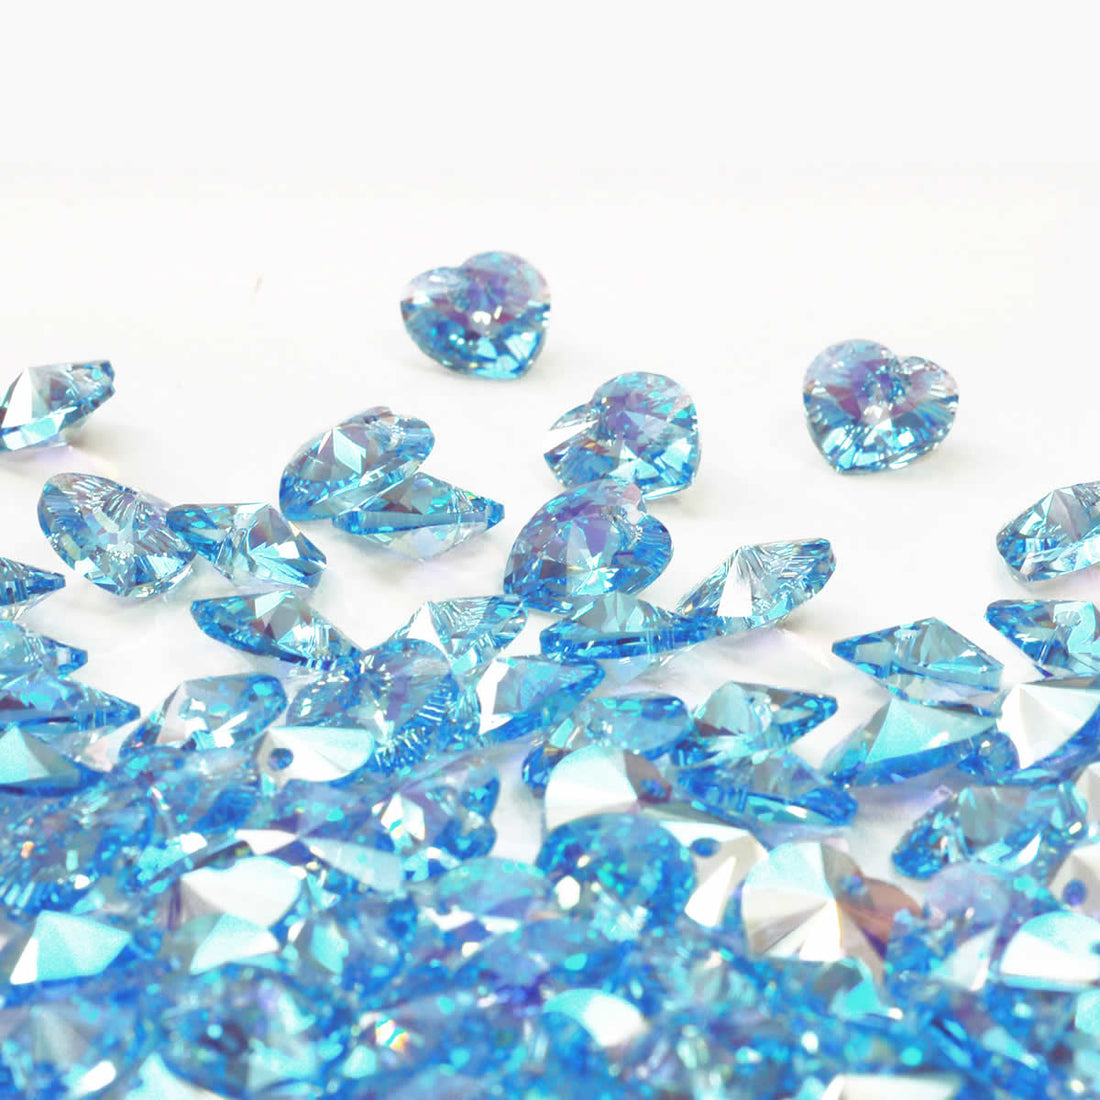 Aquamarine Birthstone Symbols and Meanings - March